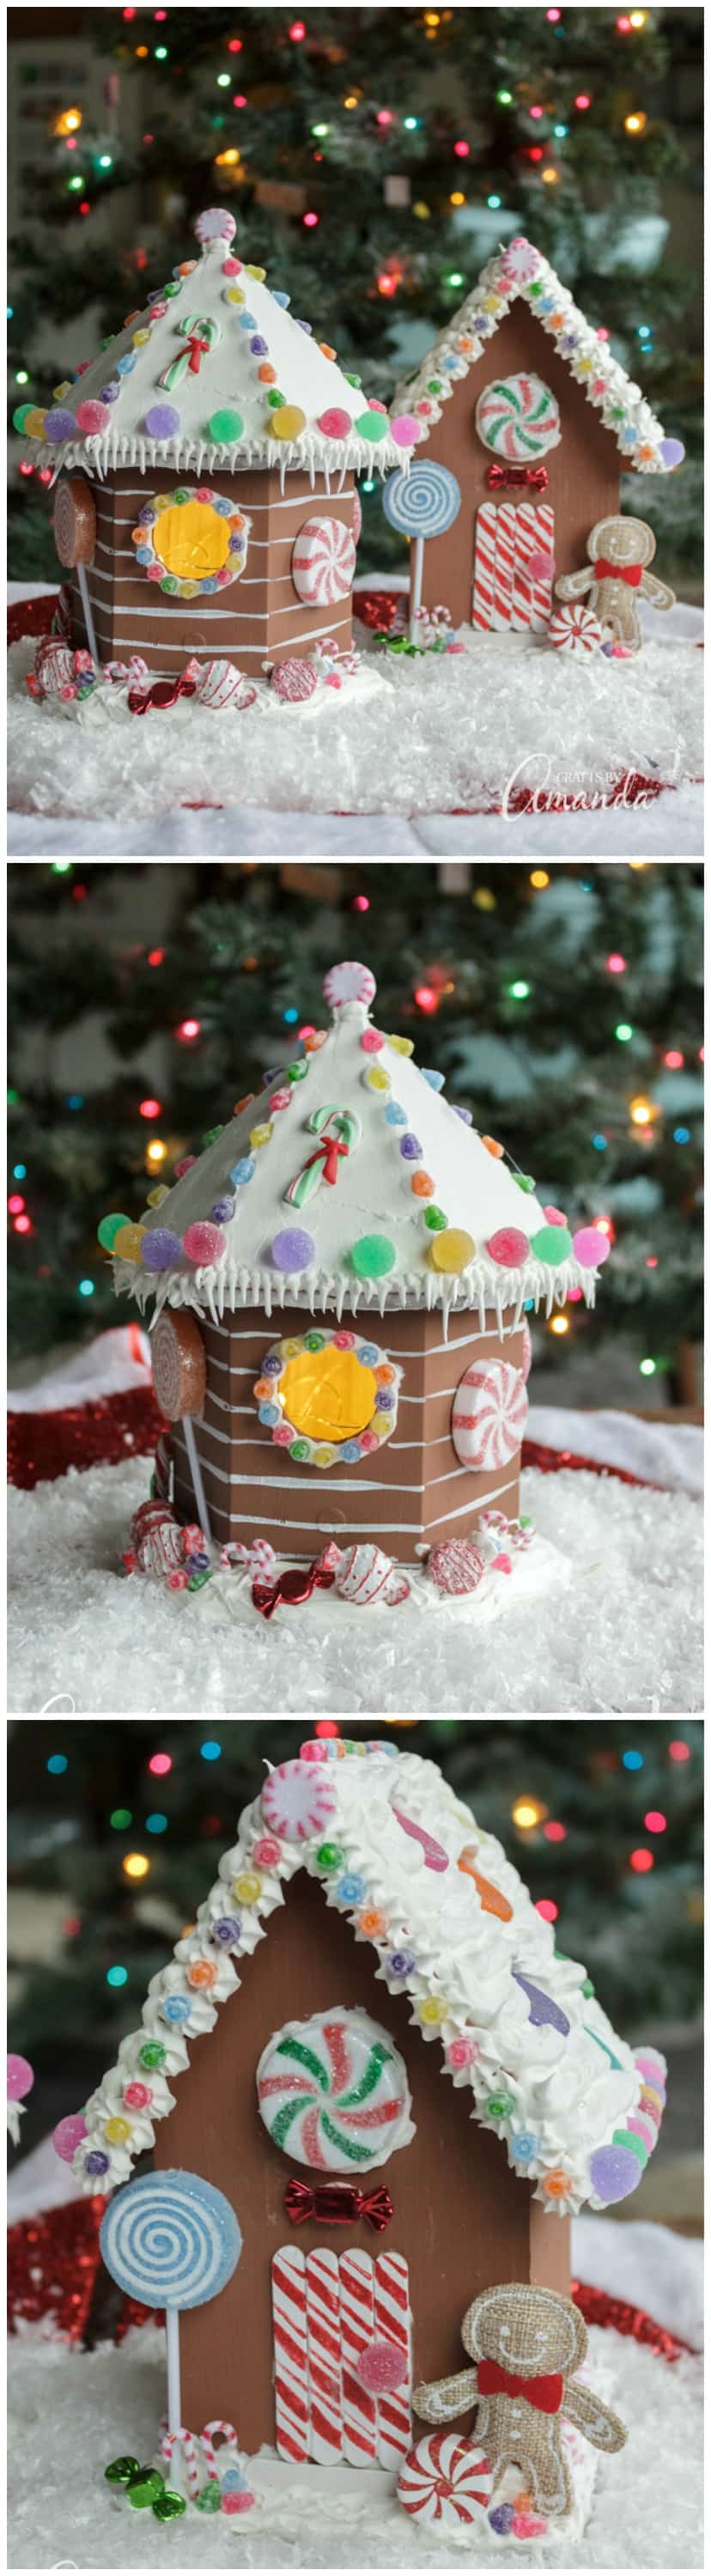 Learn how to make an adorable non-edible birdhouse gingerbread house to decorate your home for Christmas! Use it year after year! #gingerbread @gingerbreadhouse #christmascrafts #christmas